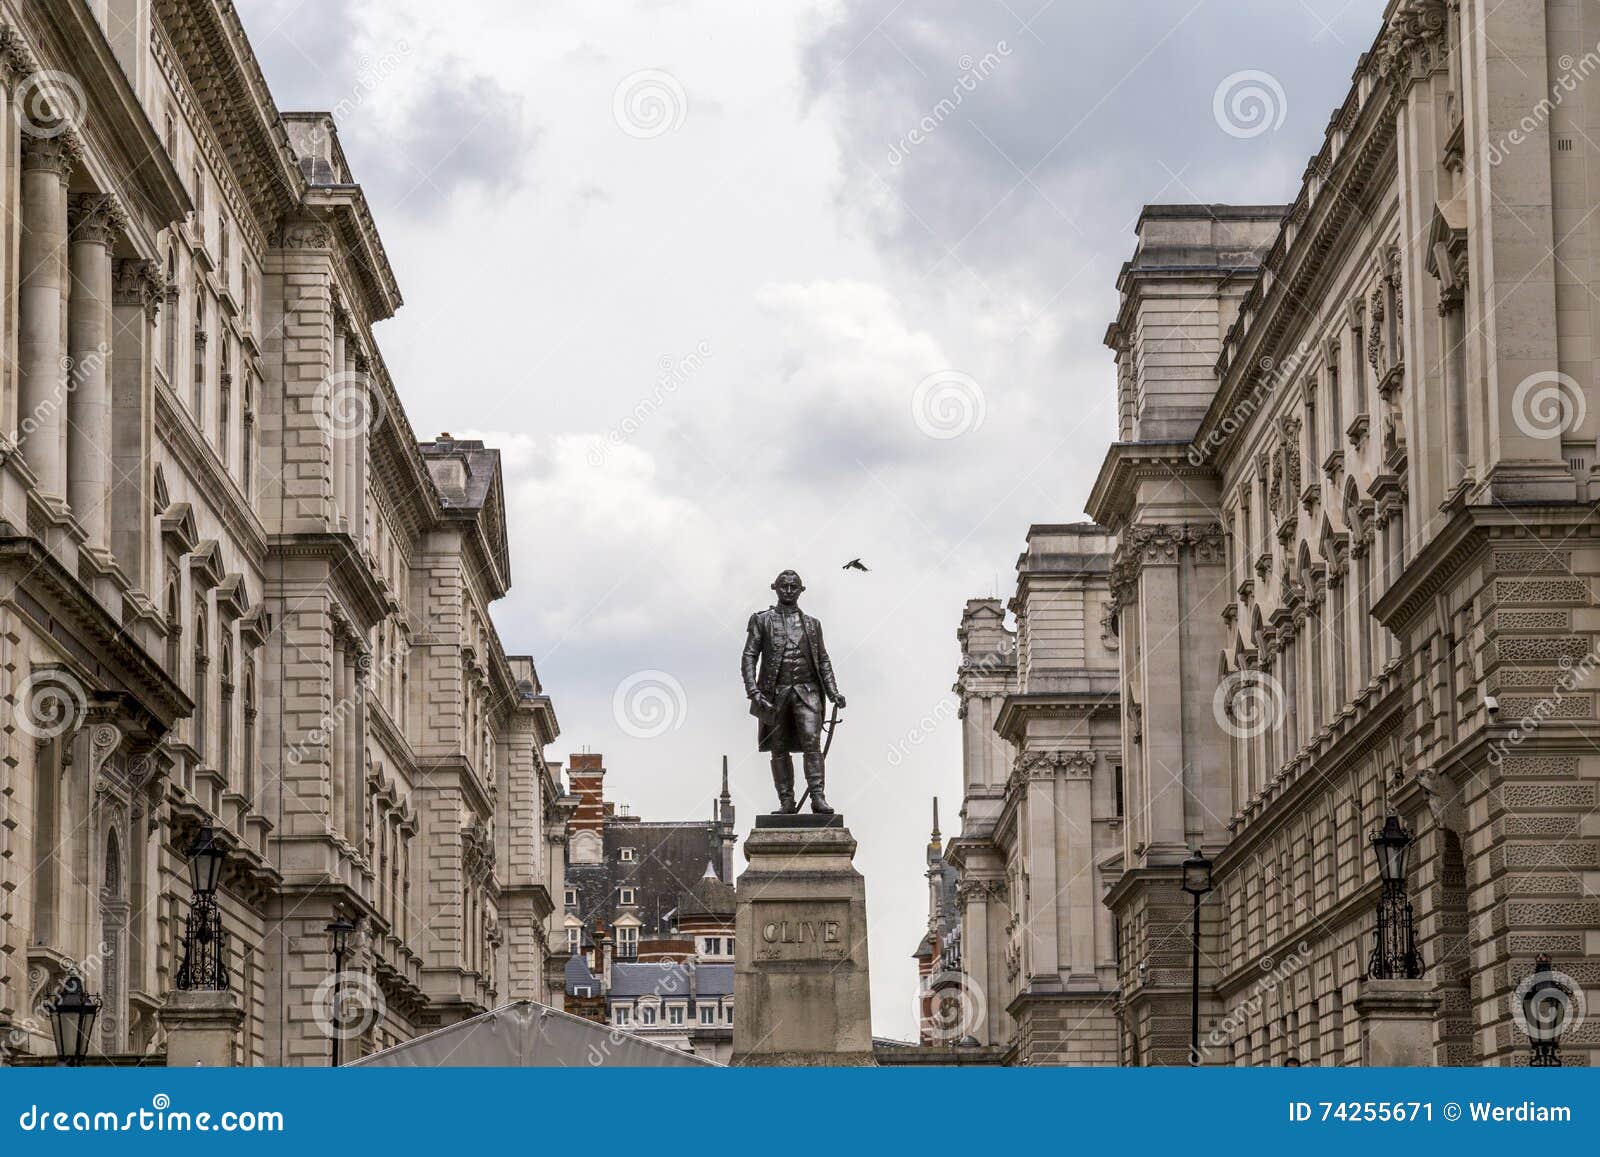 statue of robert clive, 1st baron clive, by john tweed